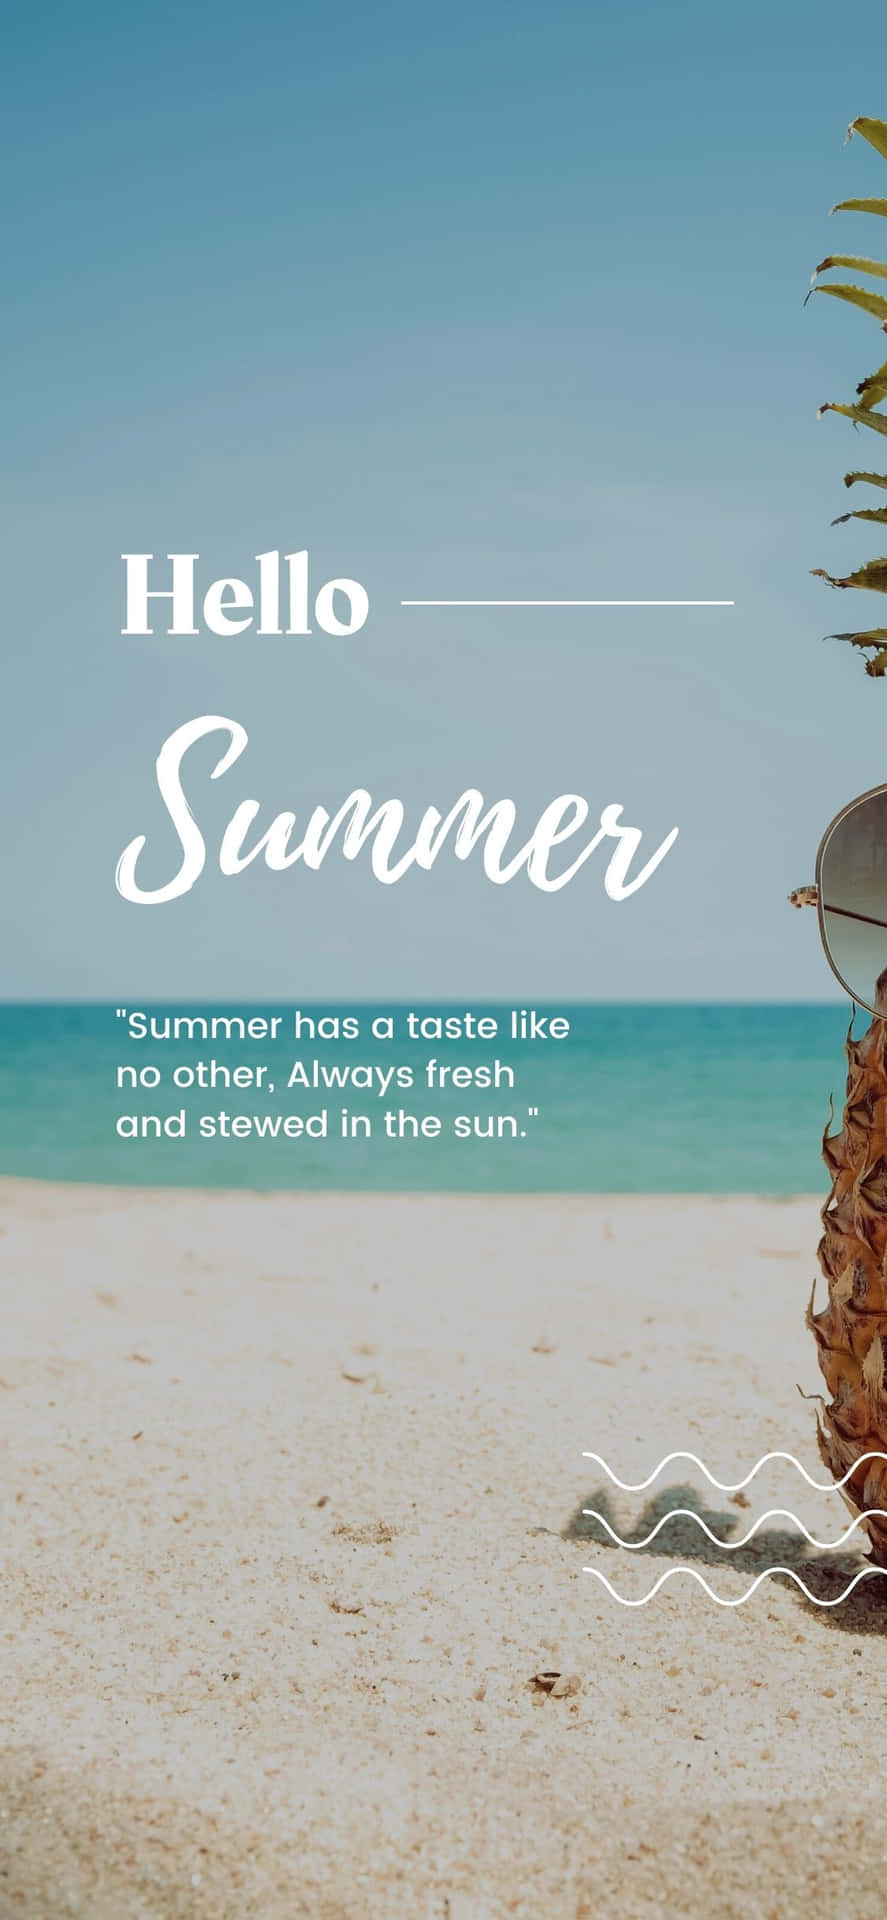 Beach Quote iPhone X Summer Background